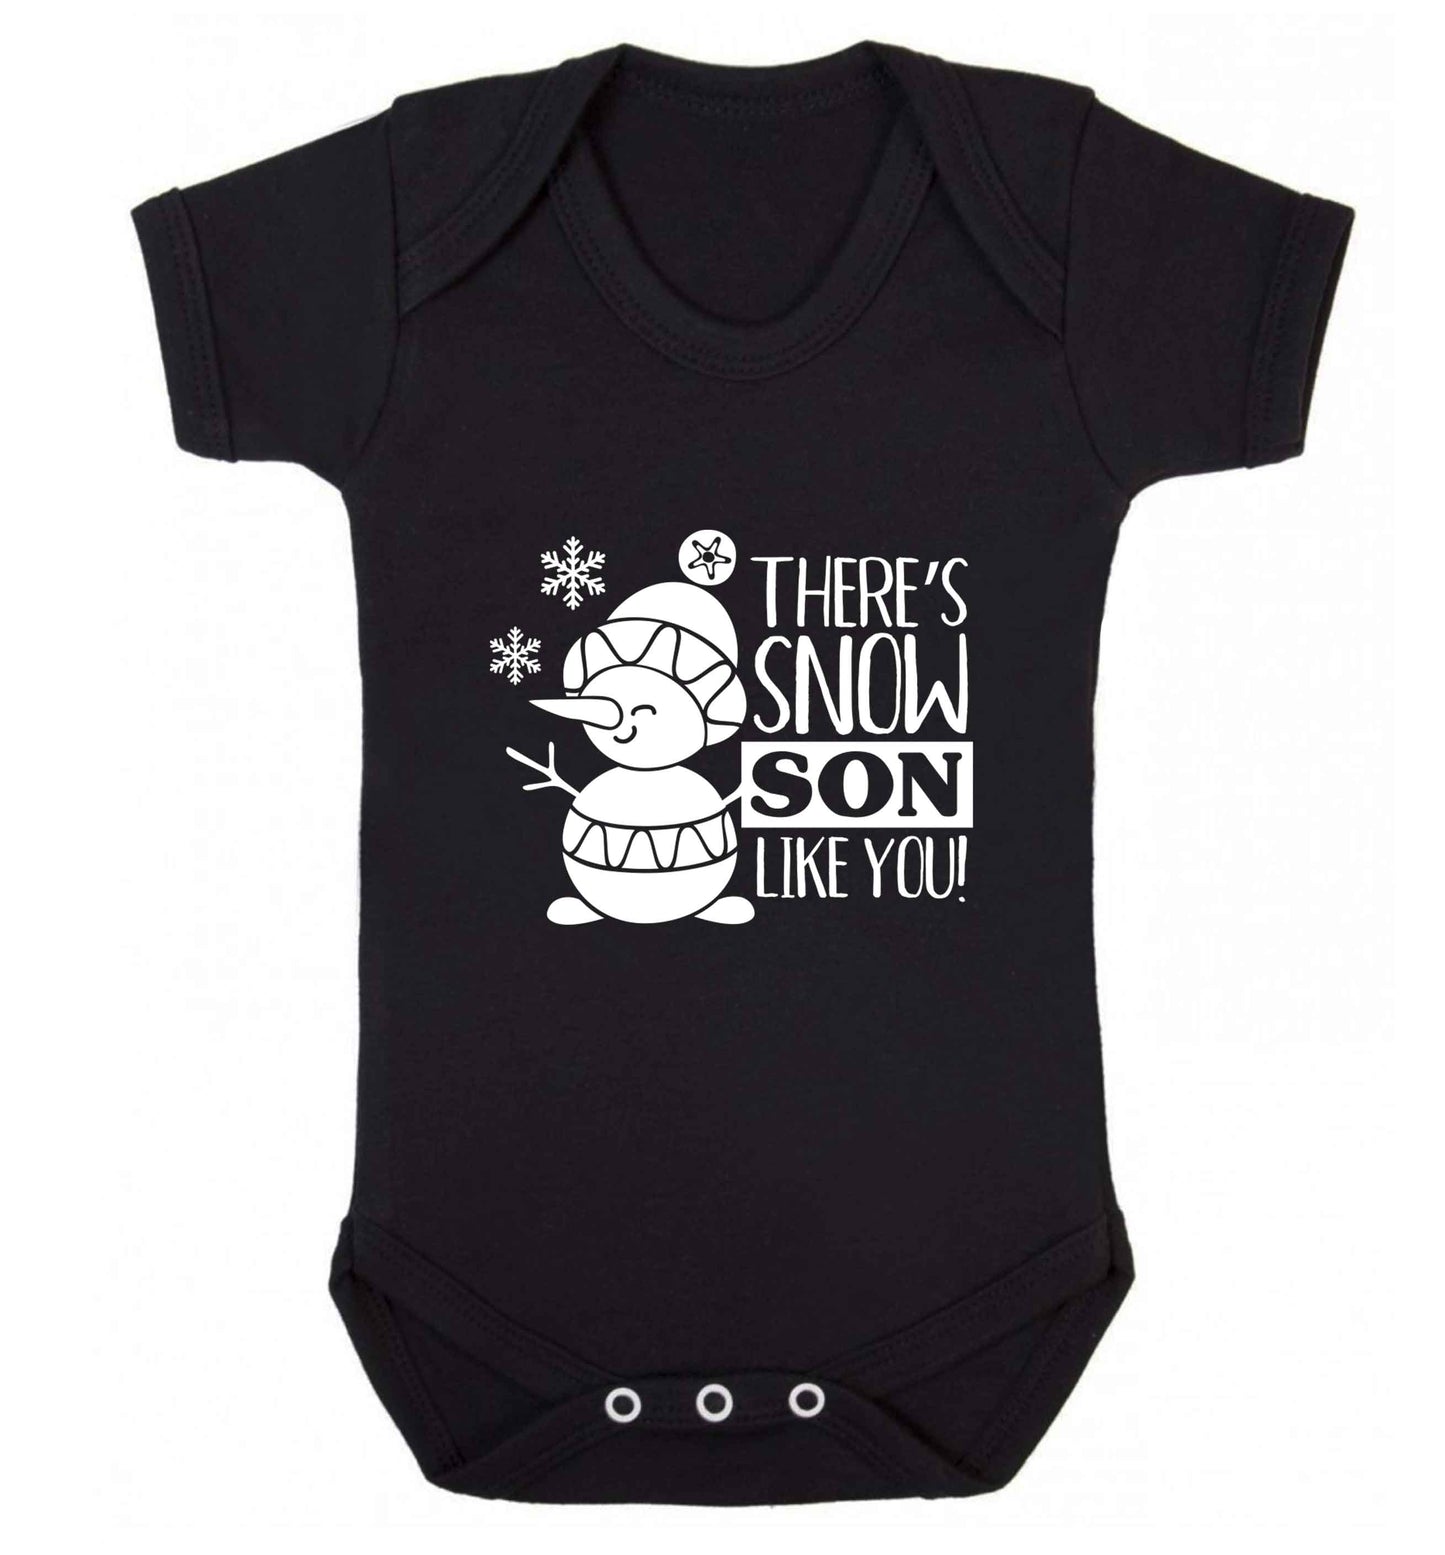 There's snow son like you baby vest black 18-24 months